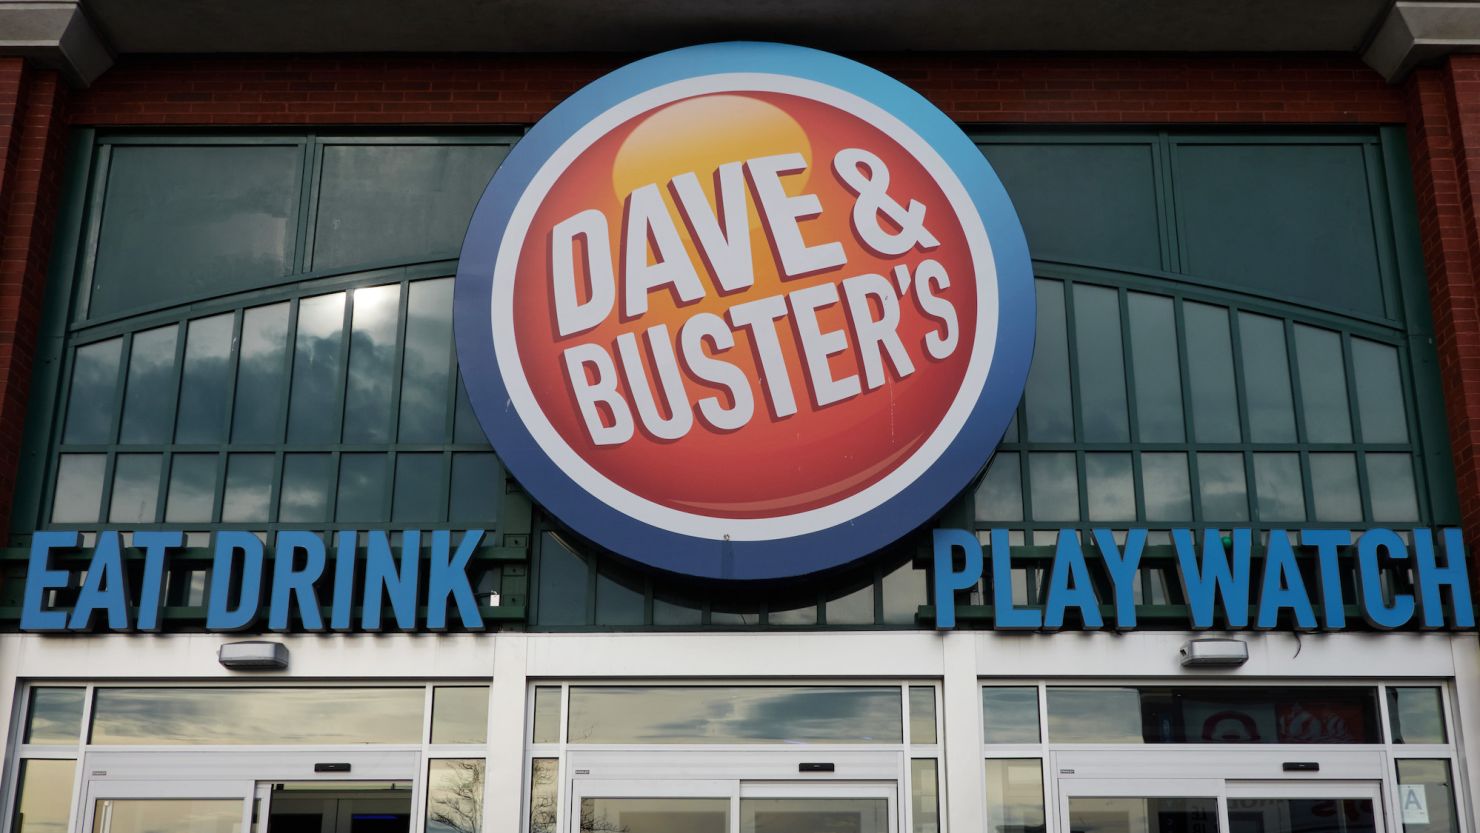 Dave and Buster’s, the popular restaurant and entertainment chain, is getting into the betting business.